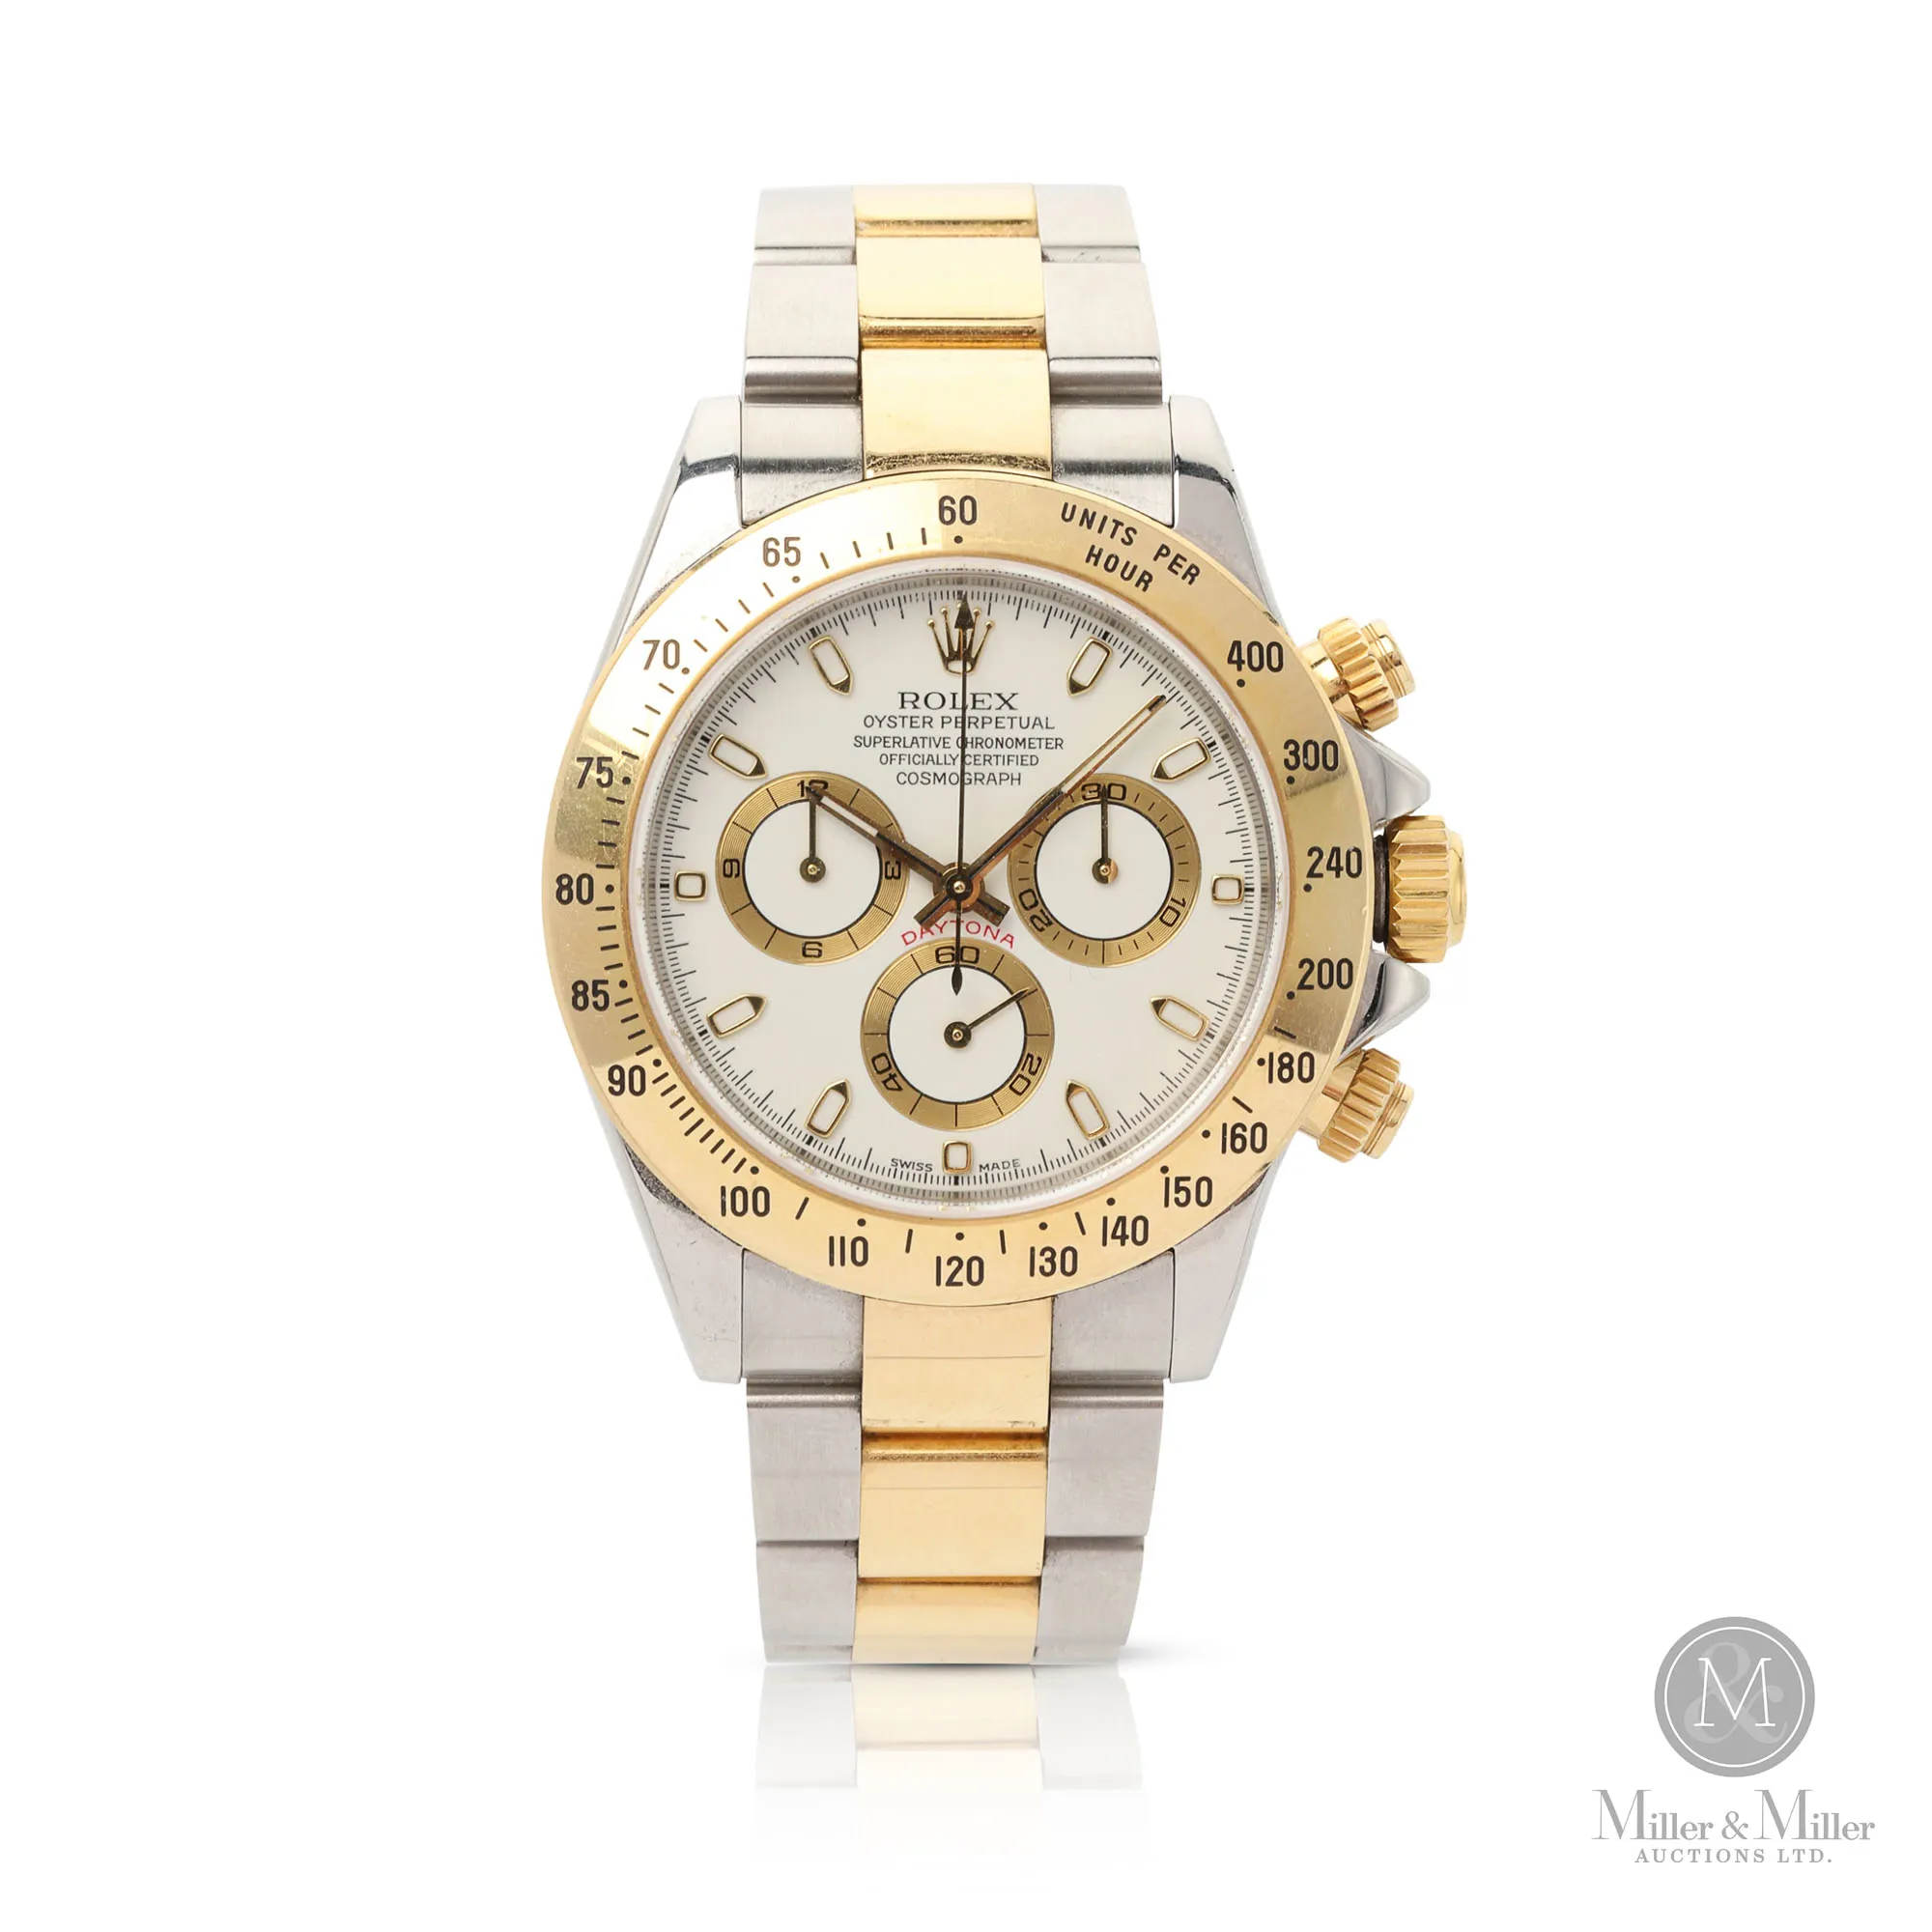 Rolex Daytona 116523 38mm Yellow gold and stainless steel White